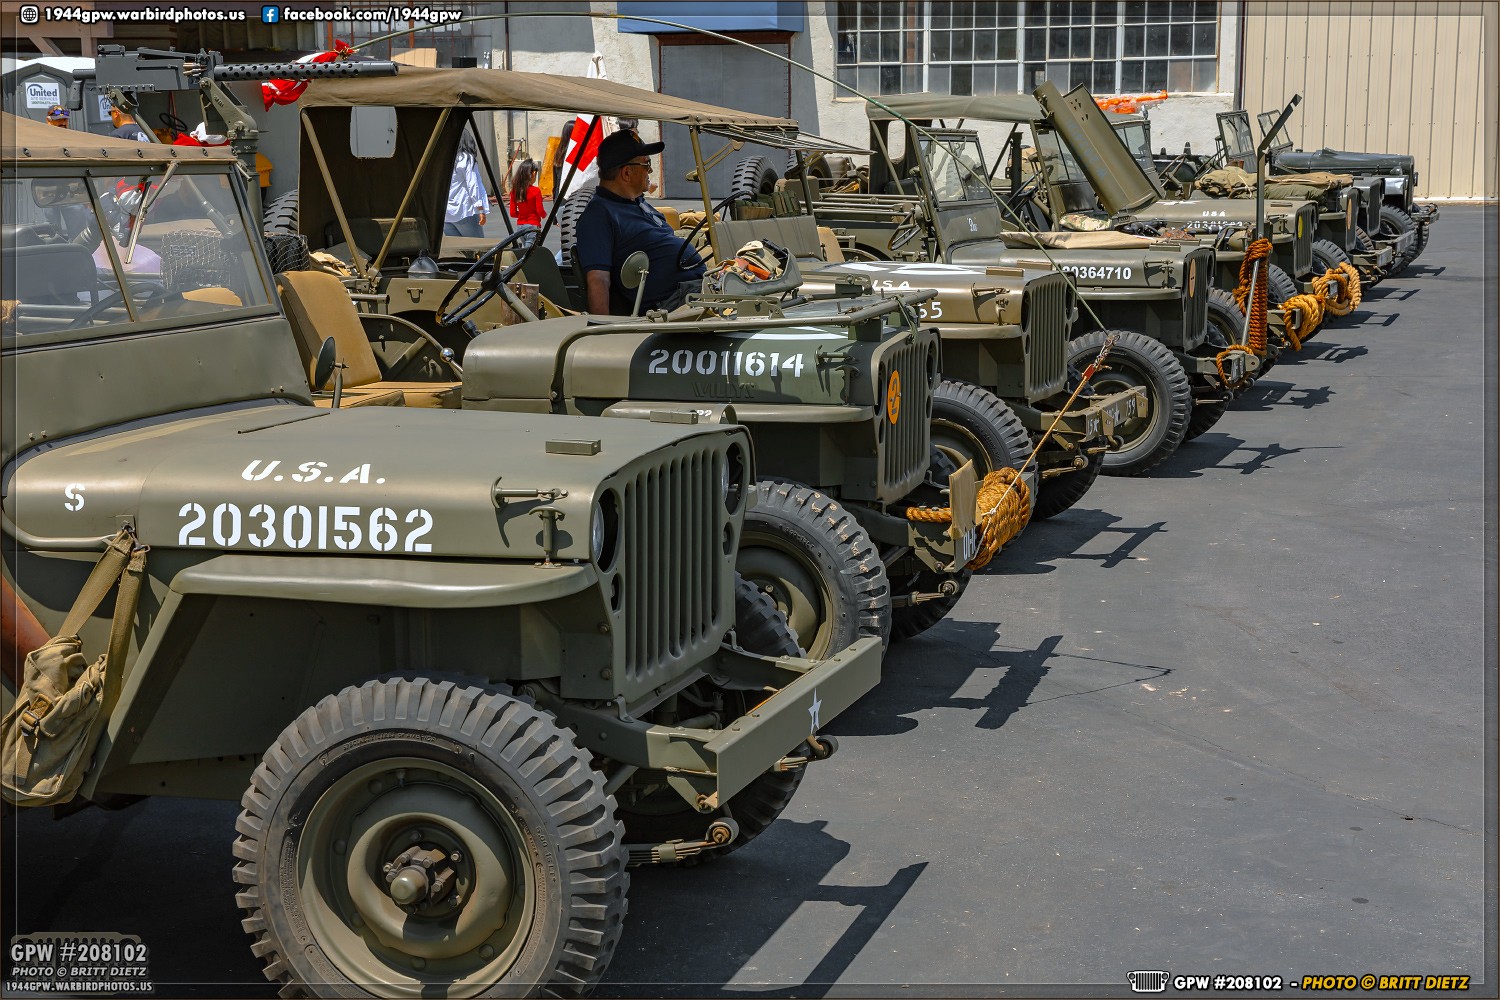 All sorts of Jeeps on display at the Planes of Fame Air Museum Wheels, Tracks, and Wings 2023 event!